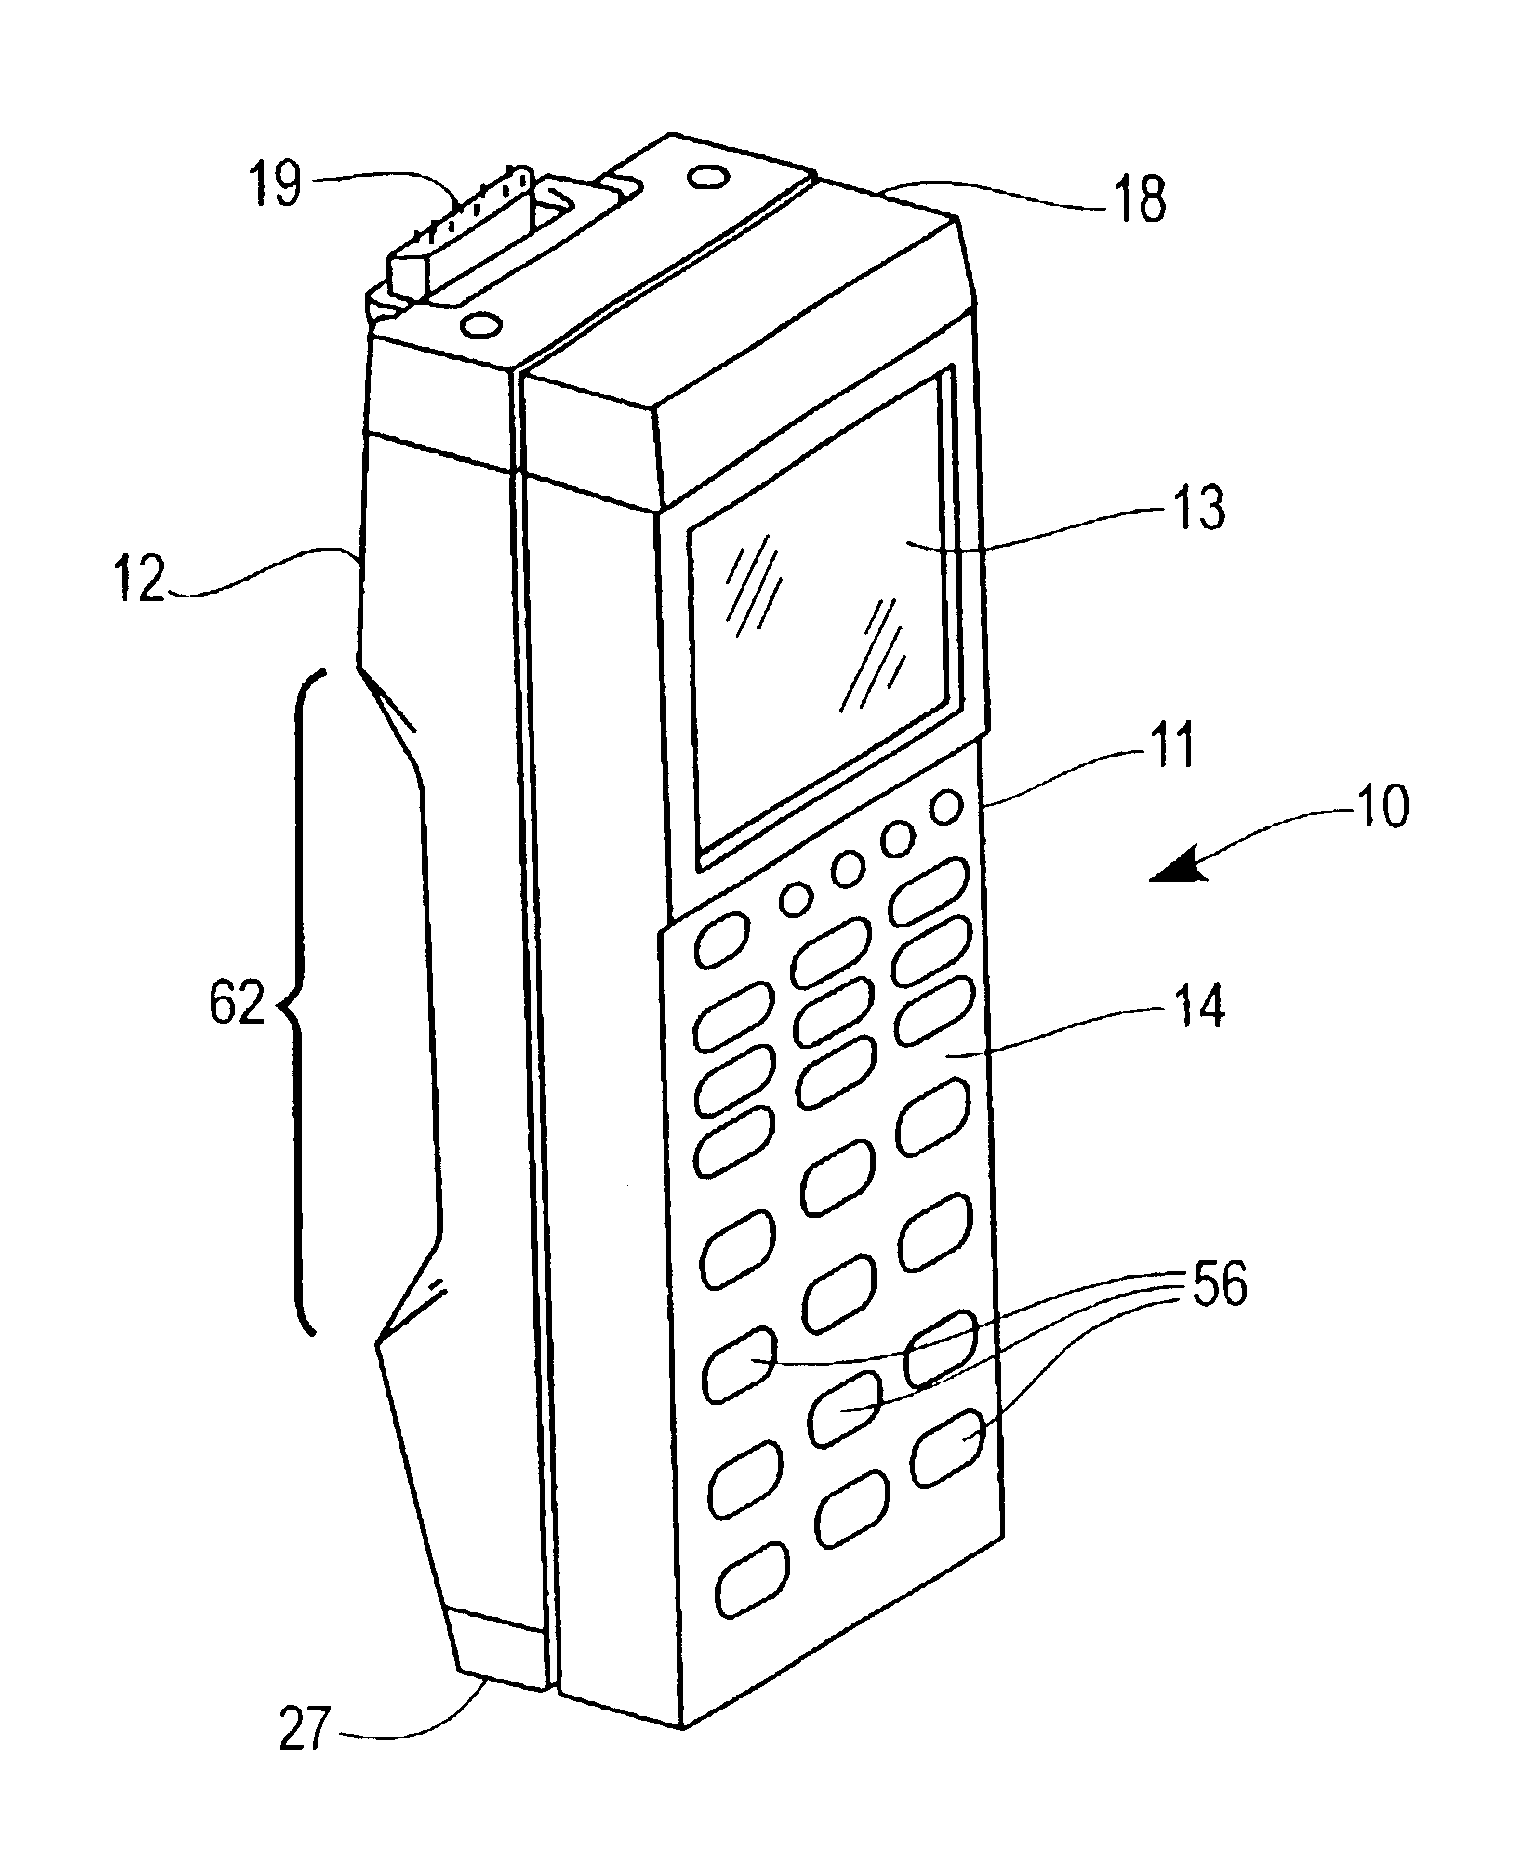 Hand-held computerized data collection terminal